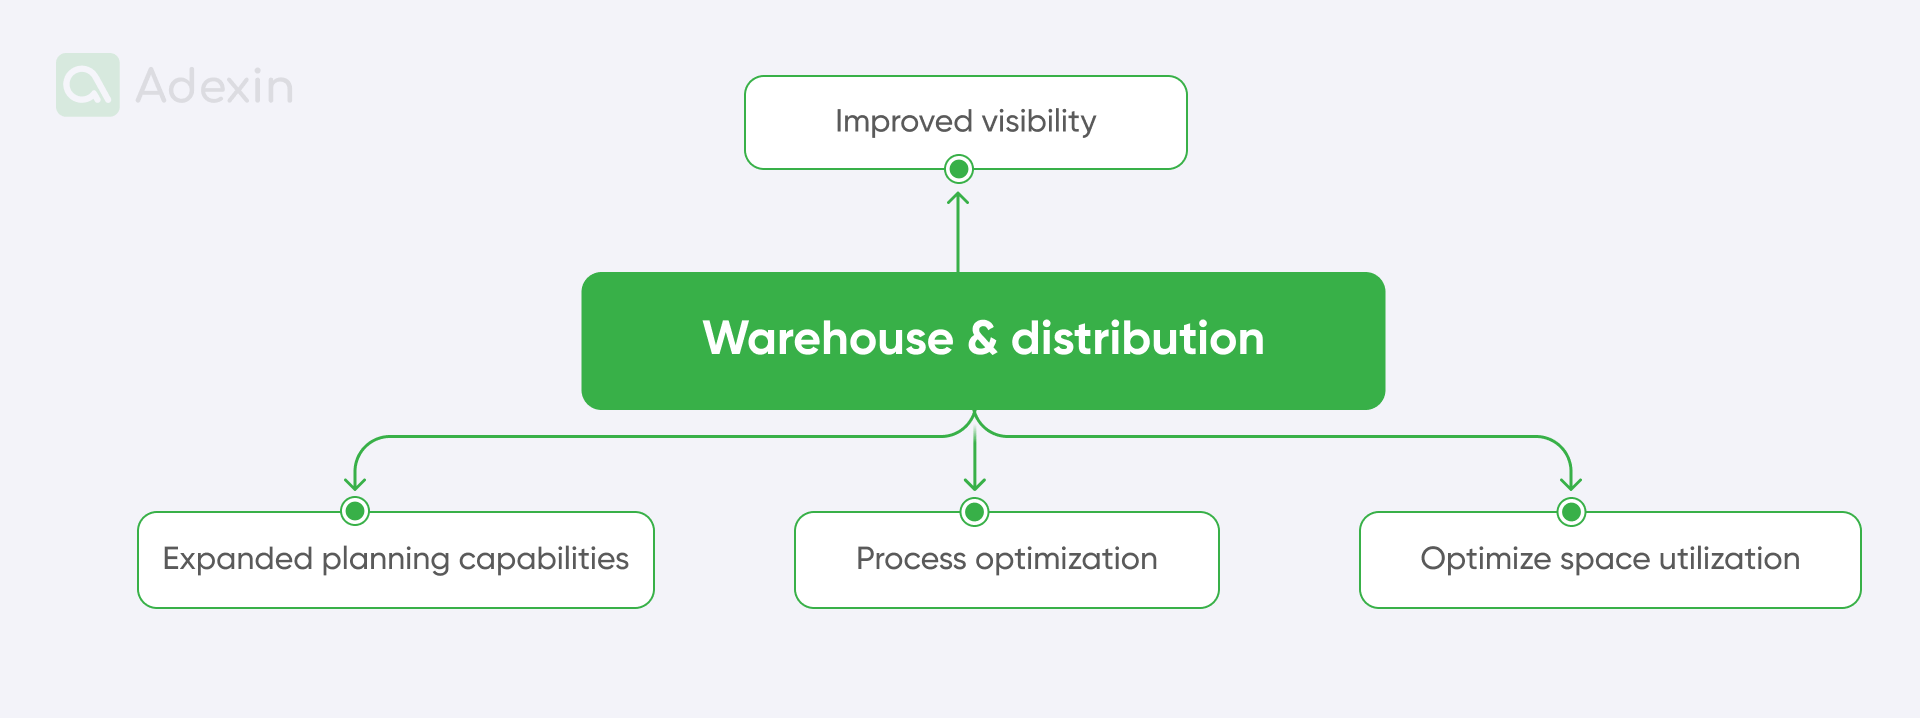 Digital twin in warehouse and distribution